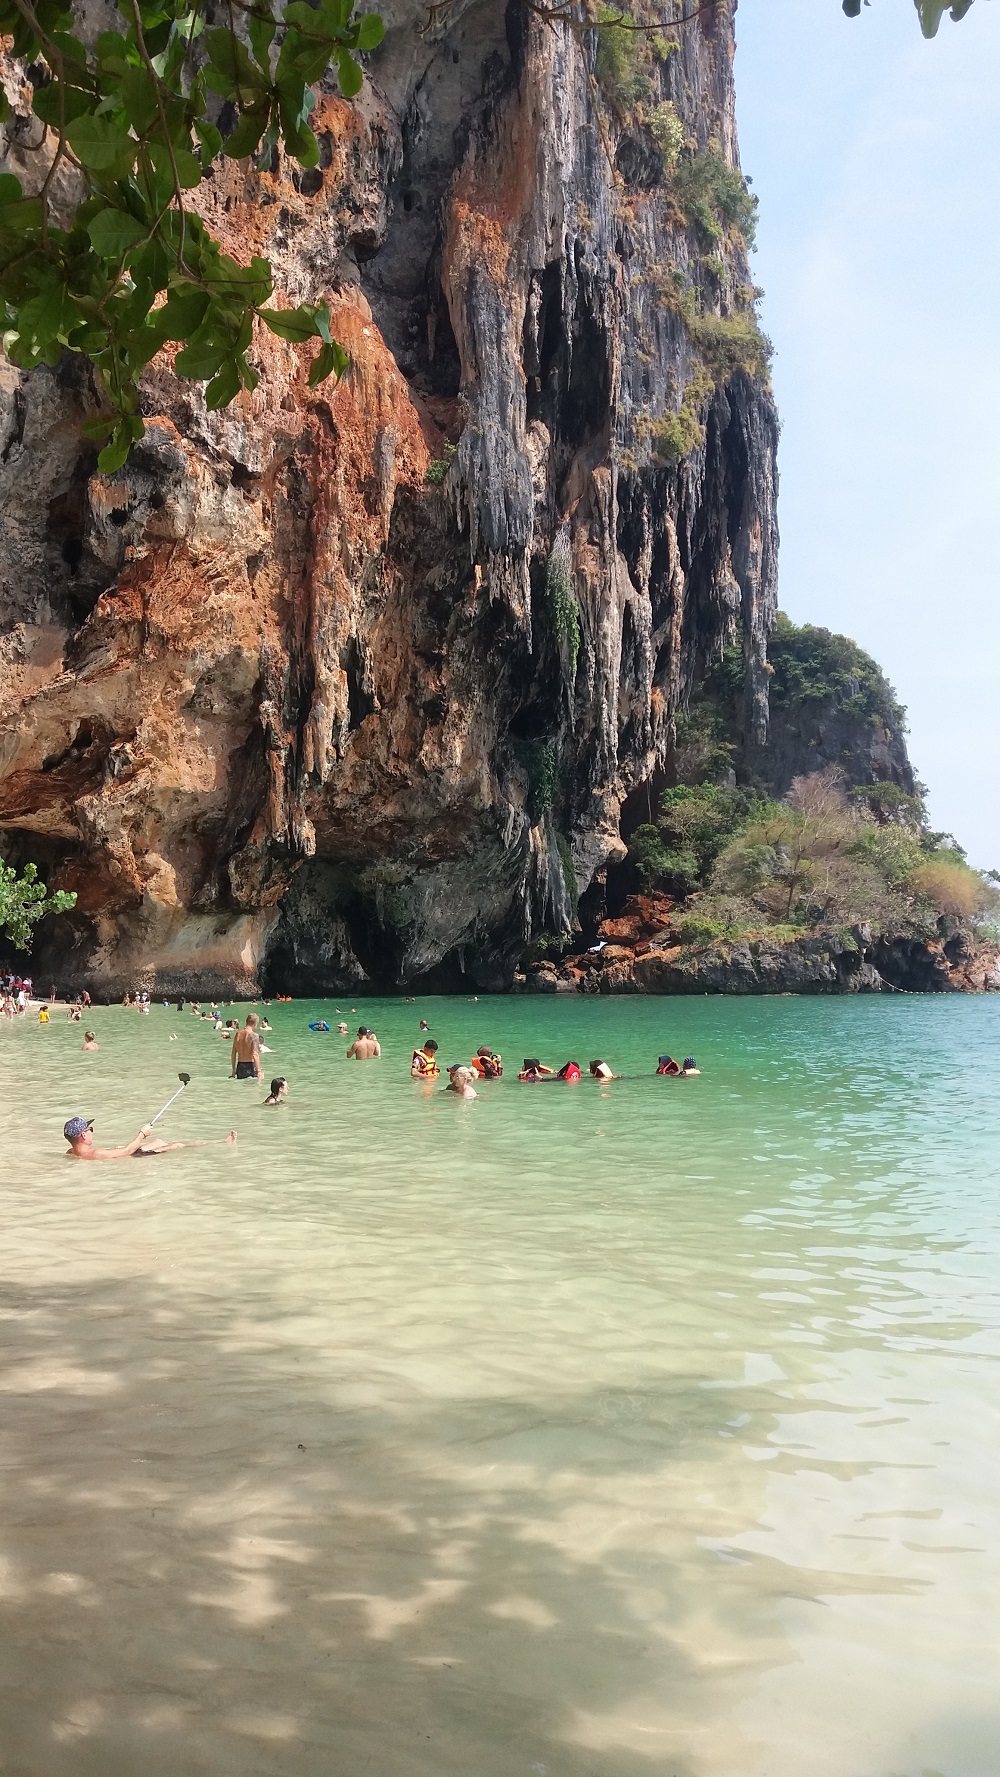 A nice programme for your stay in Krabi is kayaking at Railay Beach, a wonderful spot to do so. I went with a few friends there to kayak.